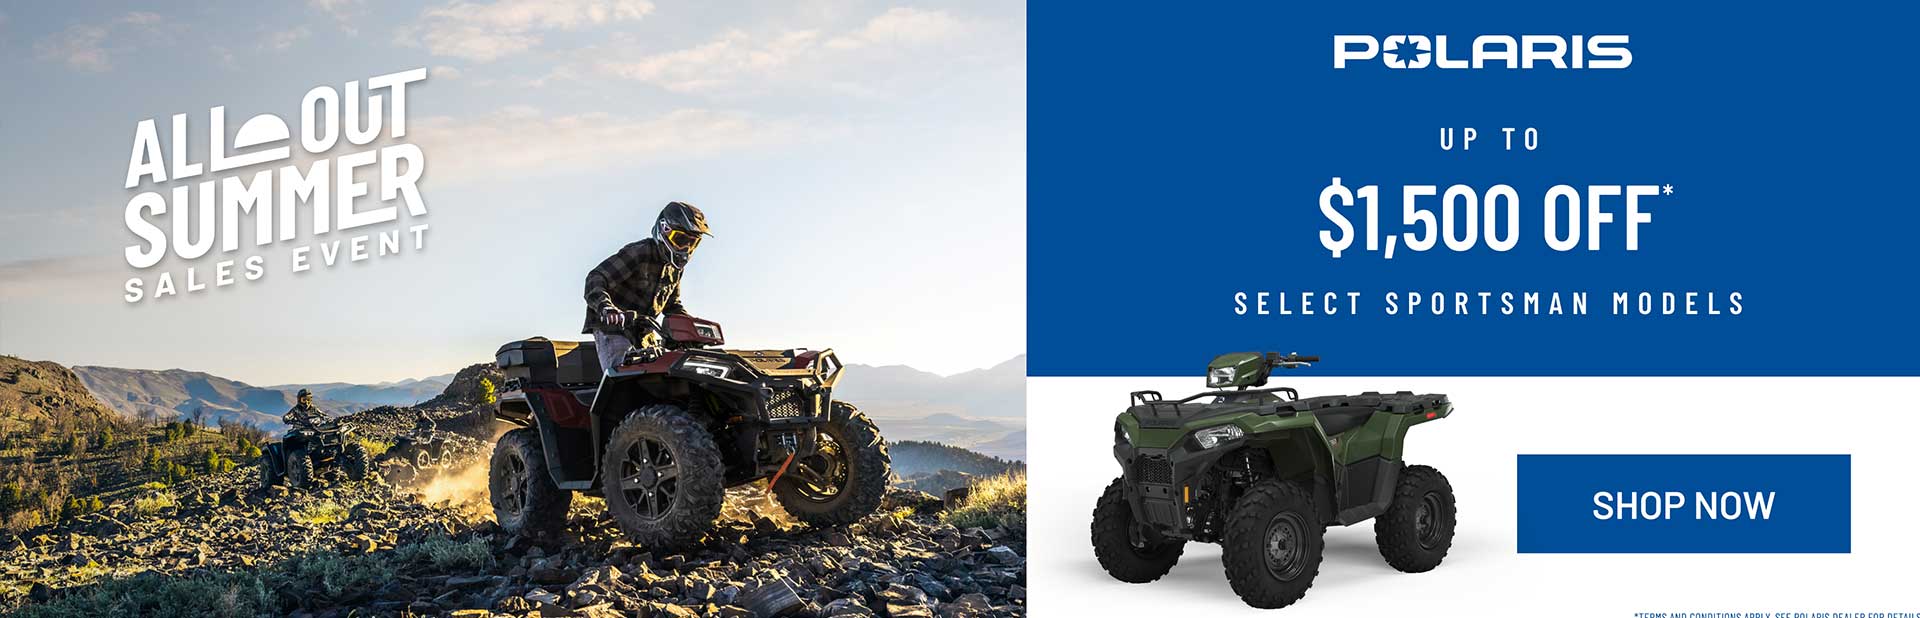 All Out Summer Sales Event - ATV